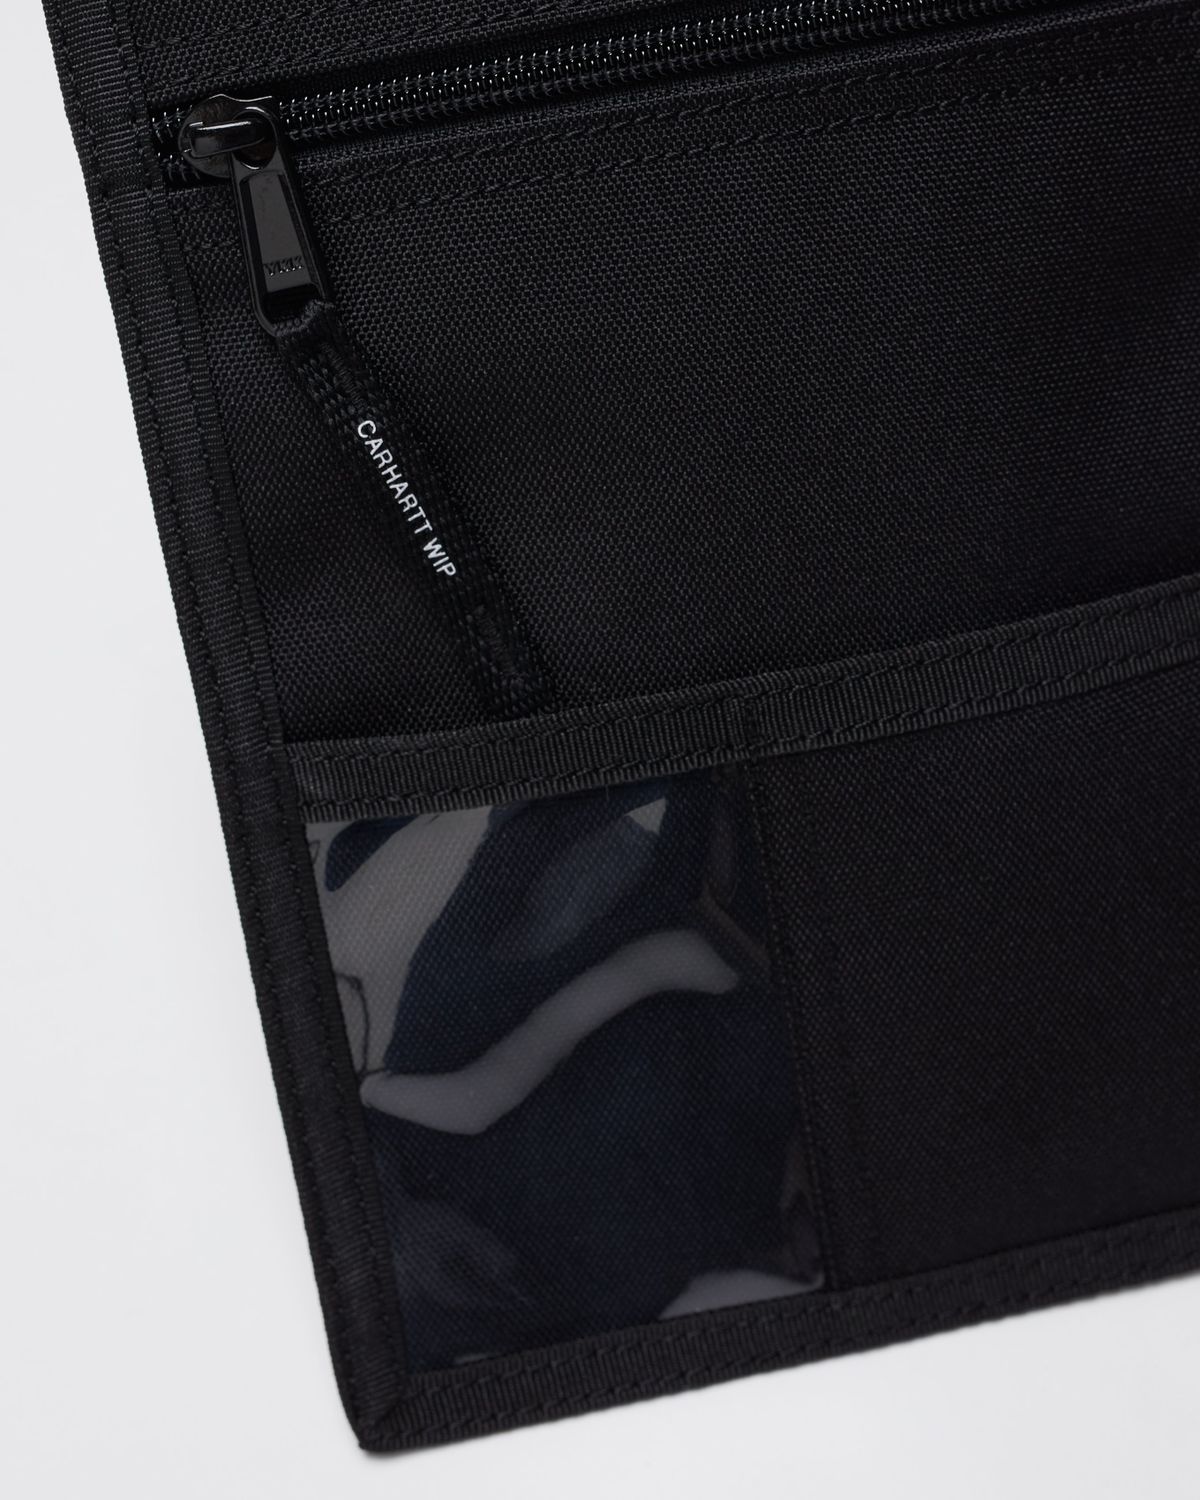 Carhartt WIP x Ljubav – Collins Neck Pouch - Pouches - Black - Image 4